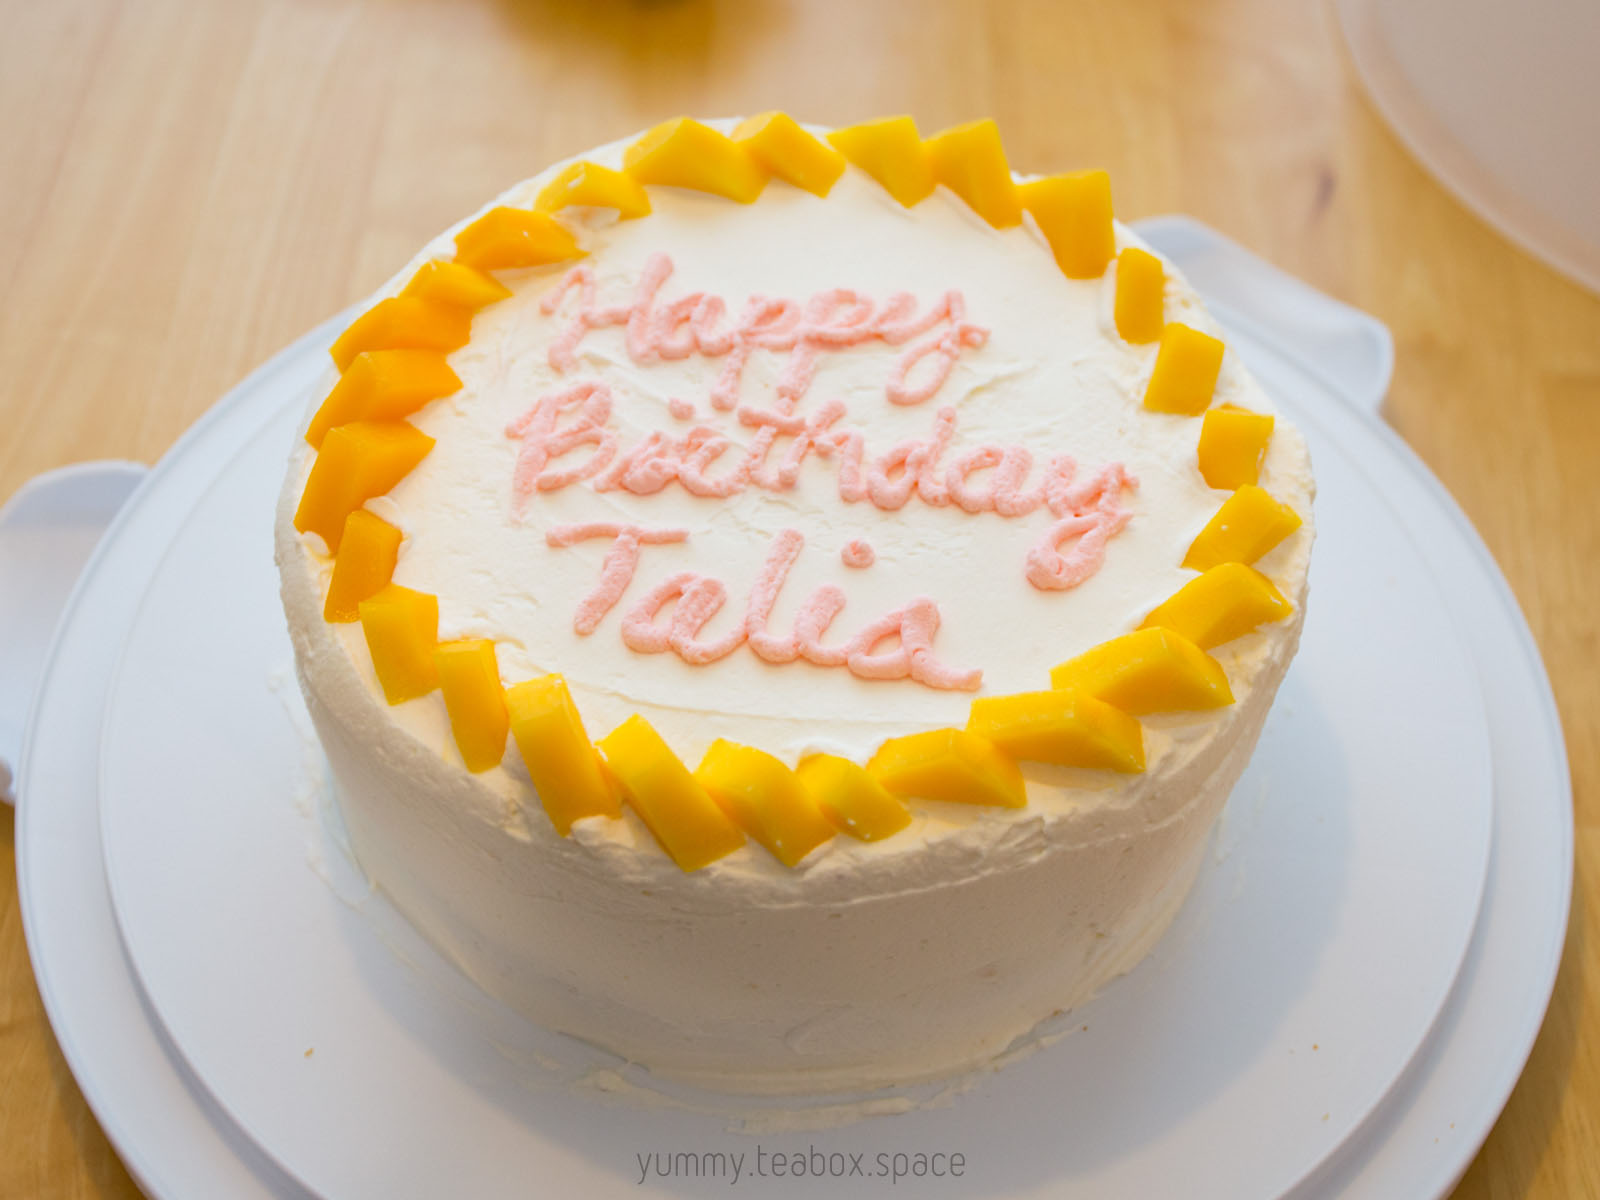 Round cake with whipped cream frosting and a border made with mango. The center says Happy Birthday Talia.